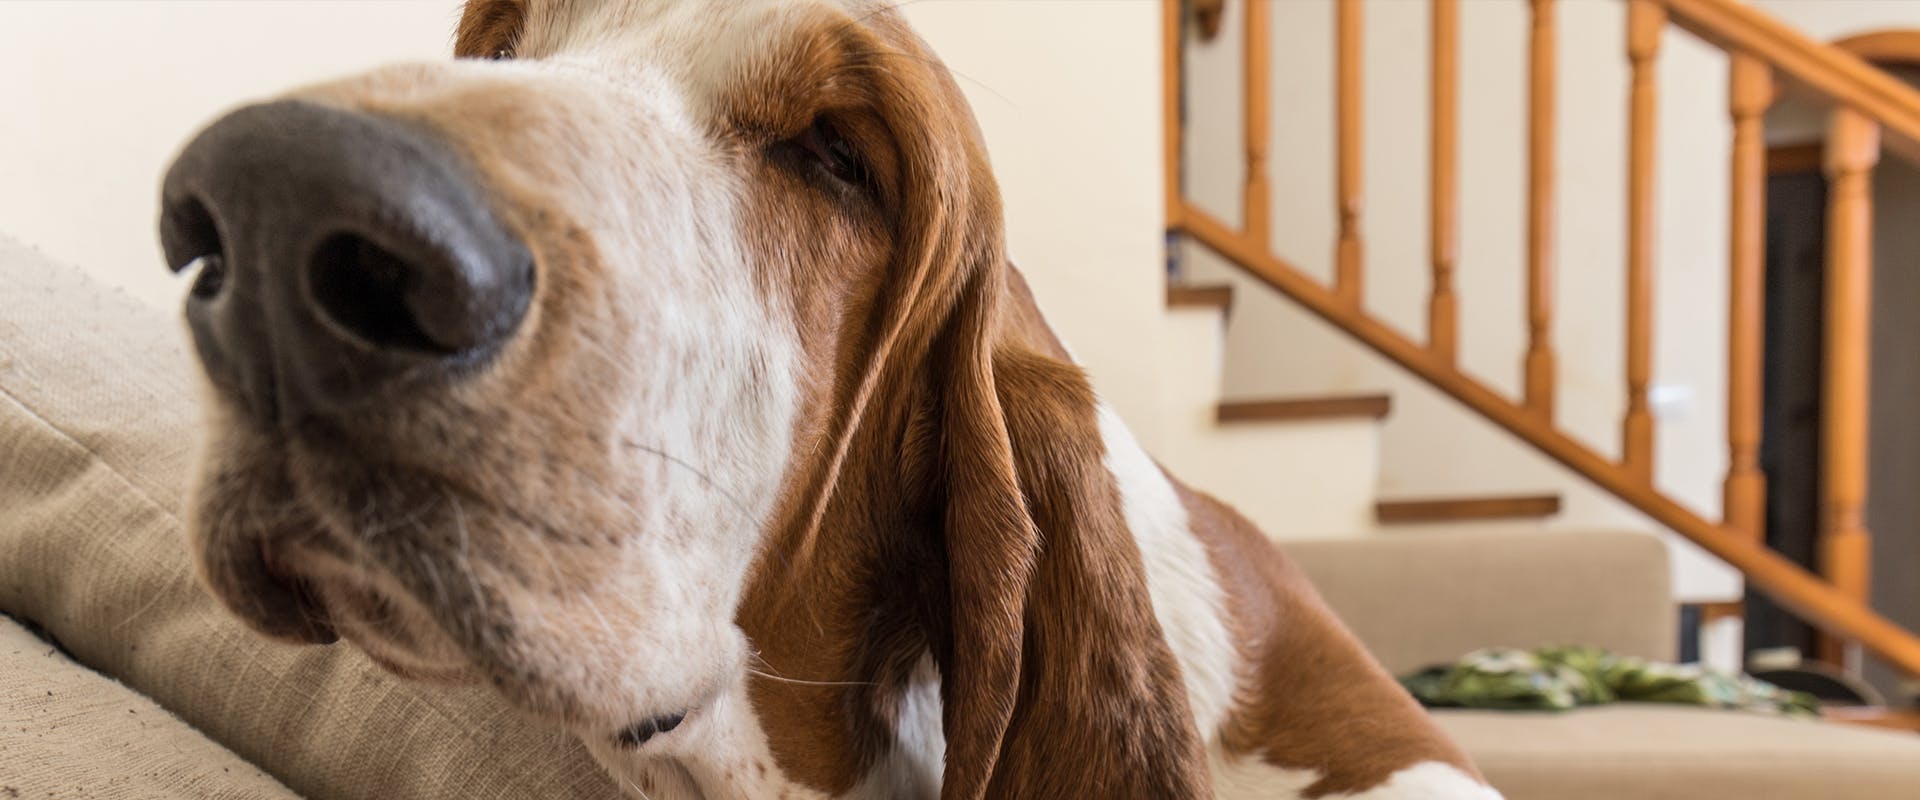 A close-up of a Basset Hound dog, sitting on the sofa 